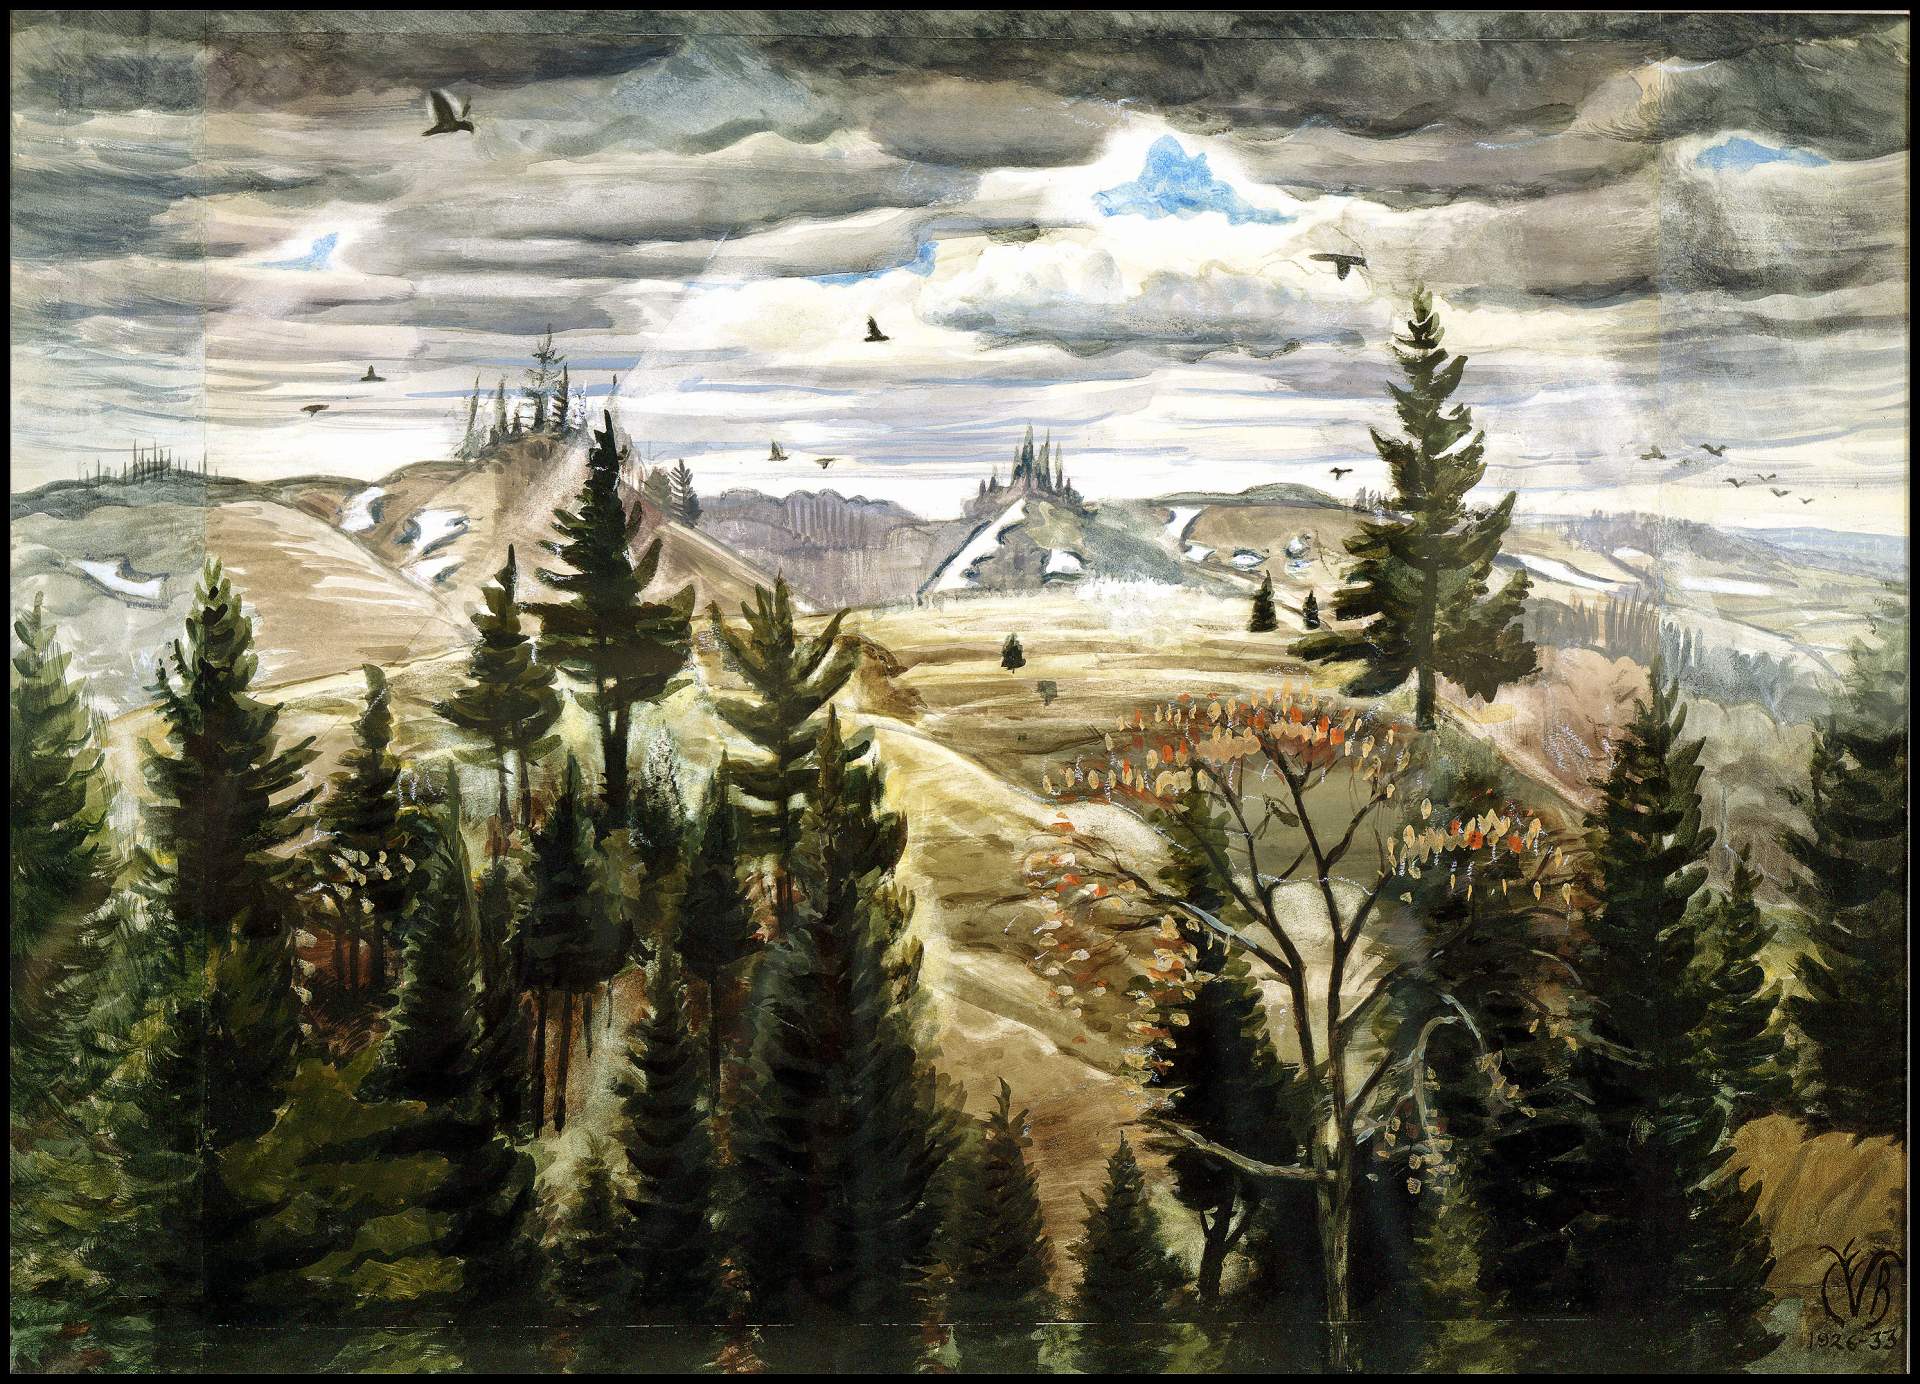 From Charles Burchfield's Journals, January 7, 1916